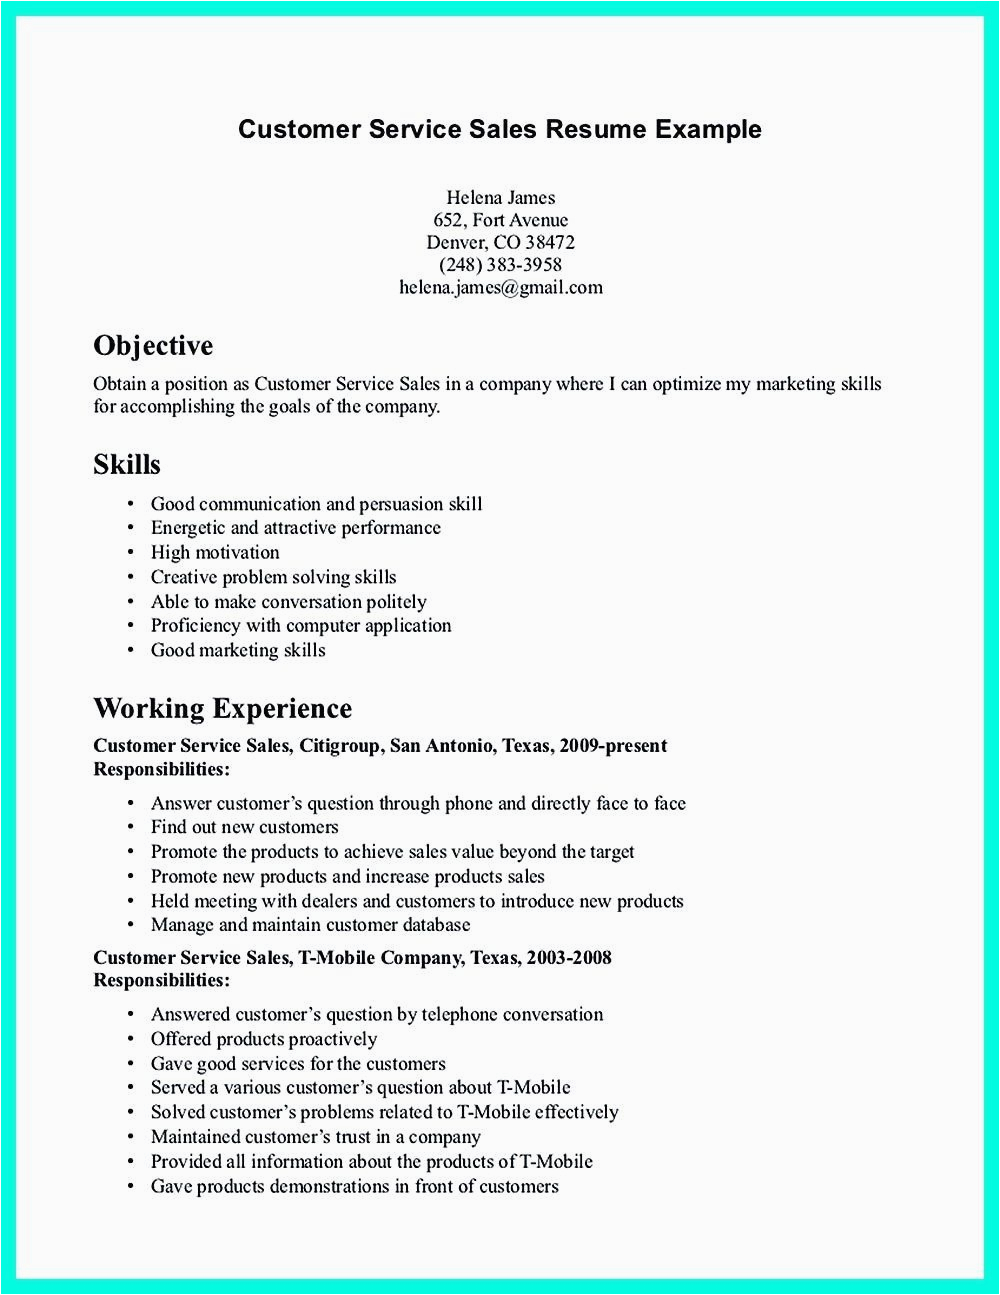 Sample Resumes for Entry Customer Service Jobs Entry Level Customer Service Resume Fresh Pin Resume Sample Template